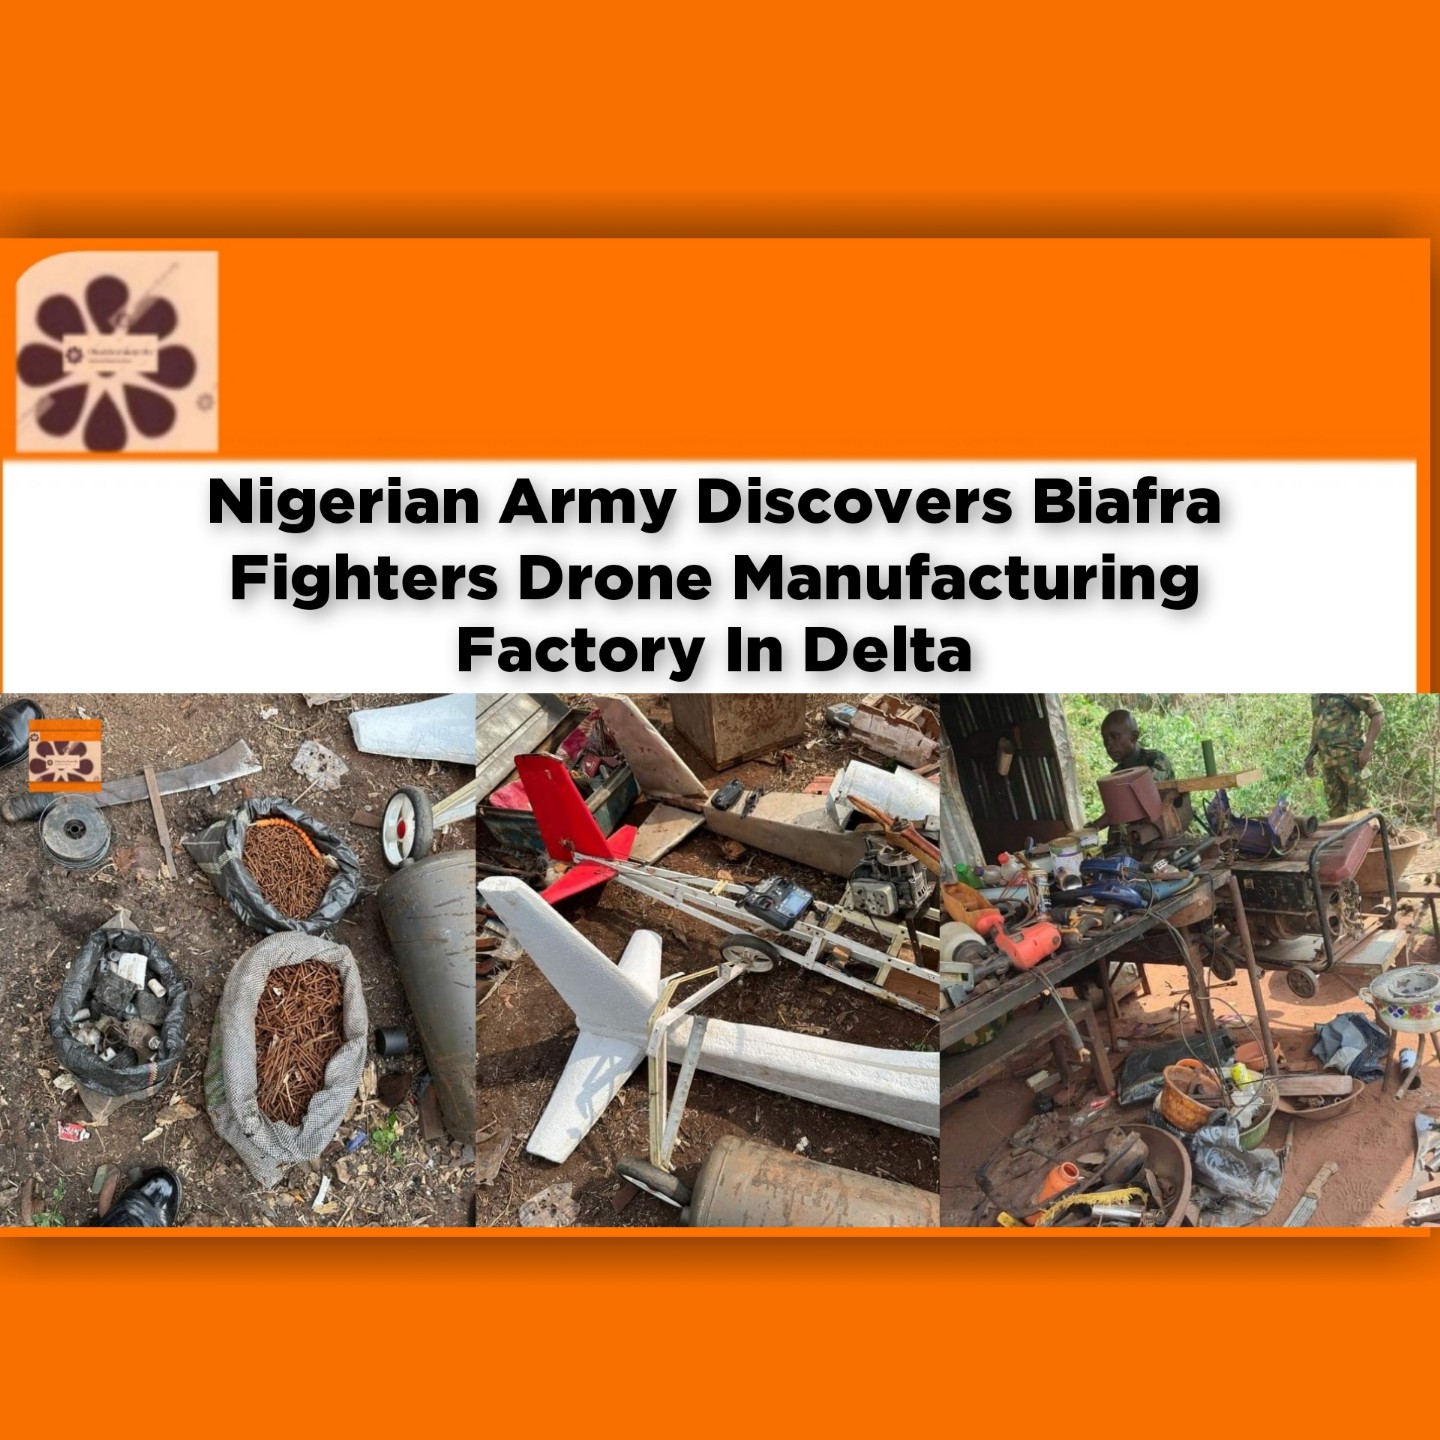 Nigerian Army Discovers Biafra Fighters Drone Manufacturing Factory In Delta